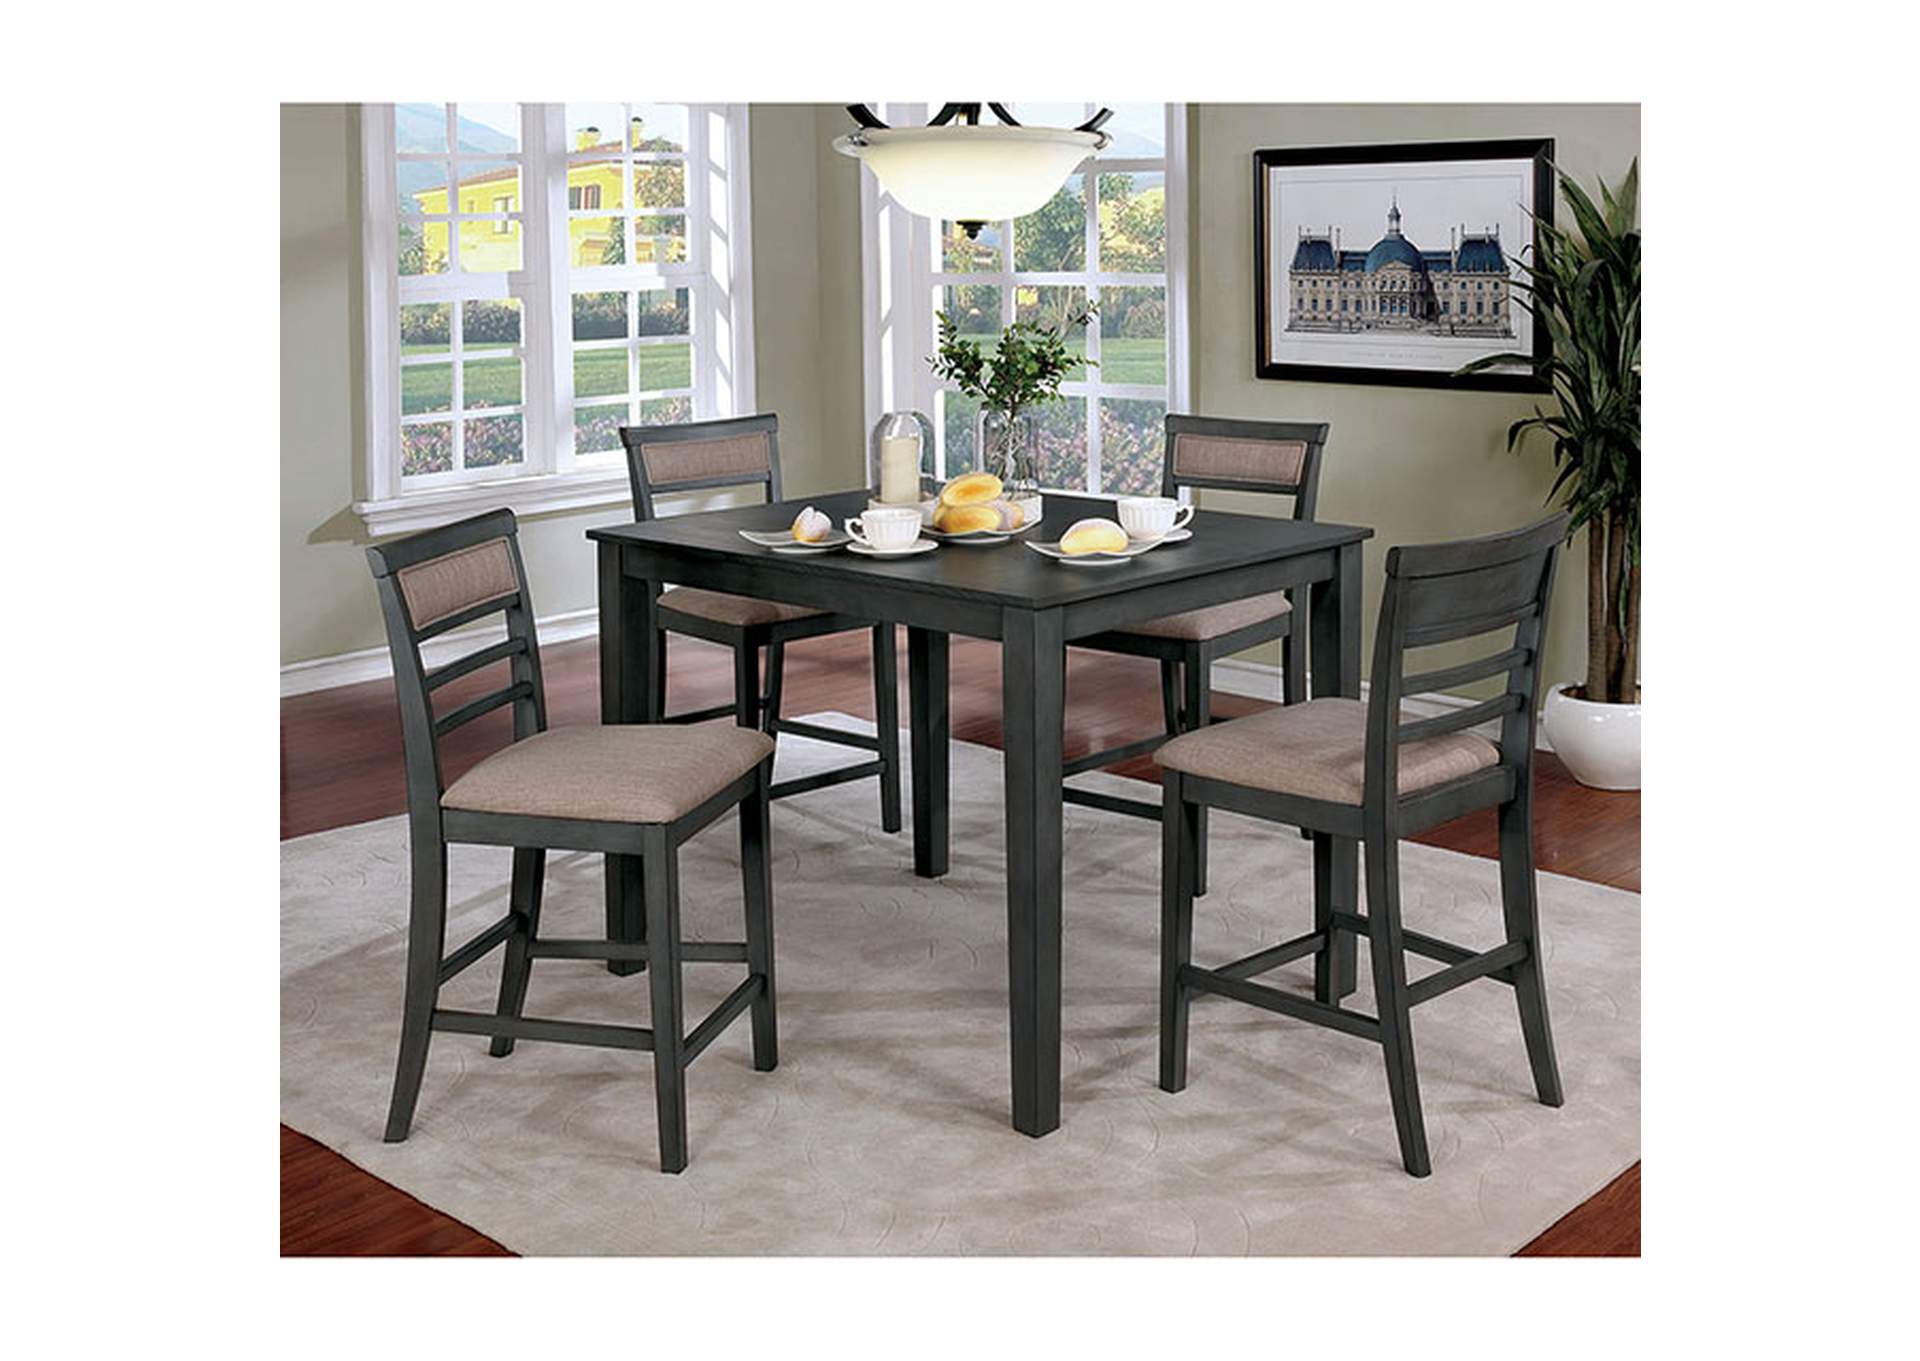 Fafnir Weathered Gray 5 Piece Counter Height Table Set,Furniture of America